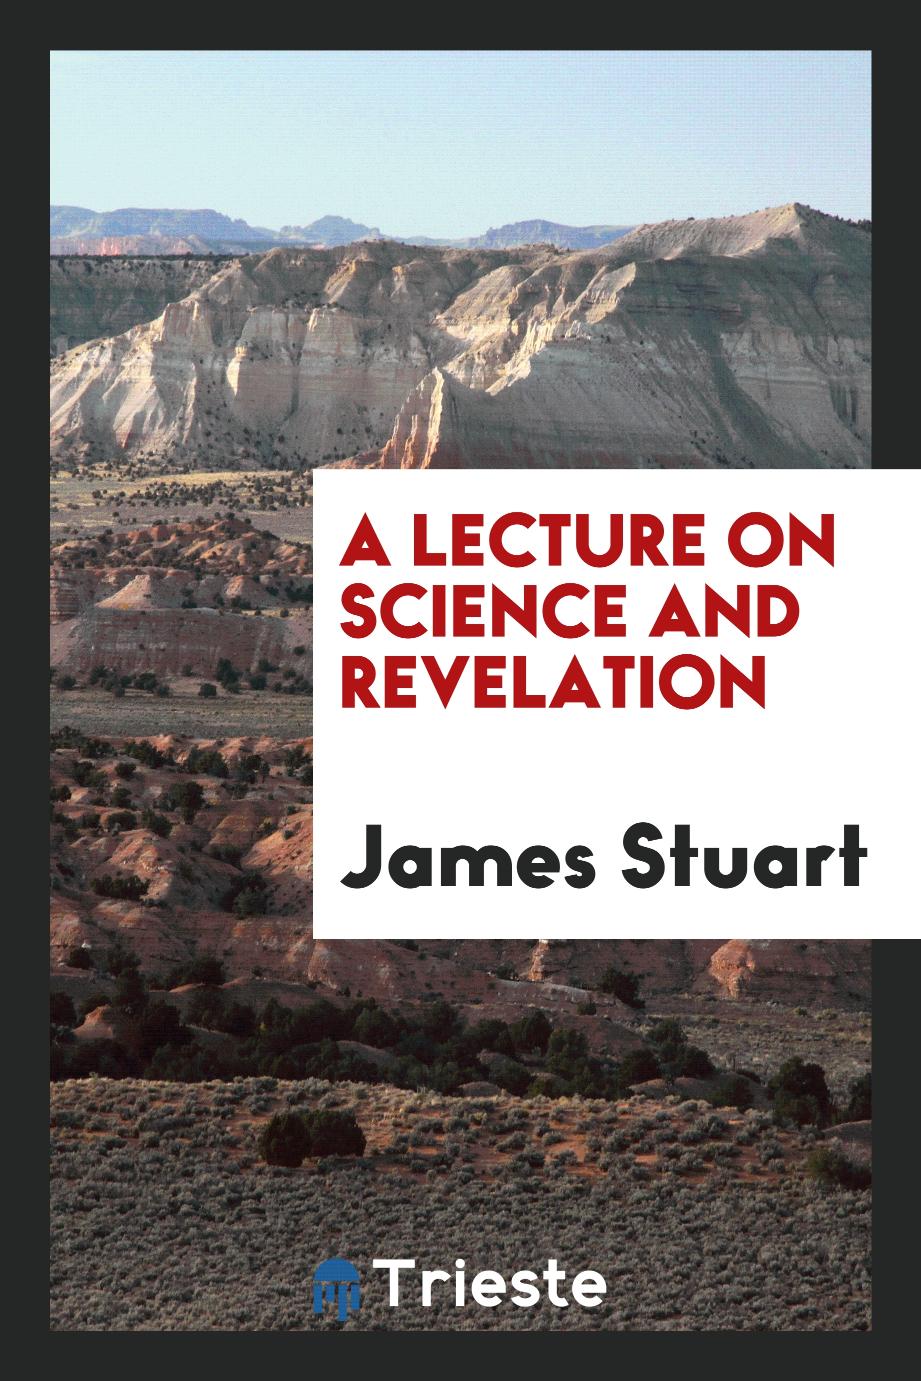 A lecture on science and revelation